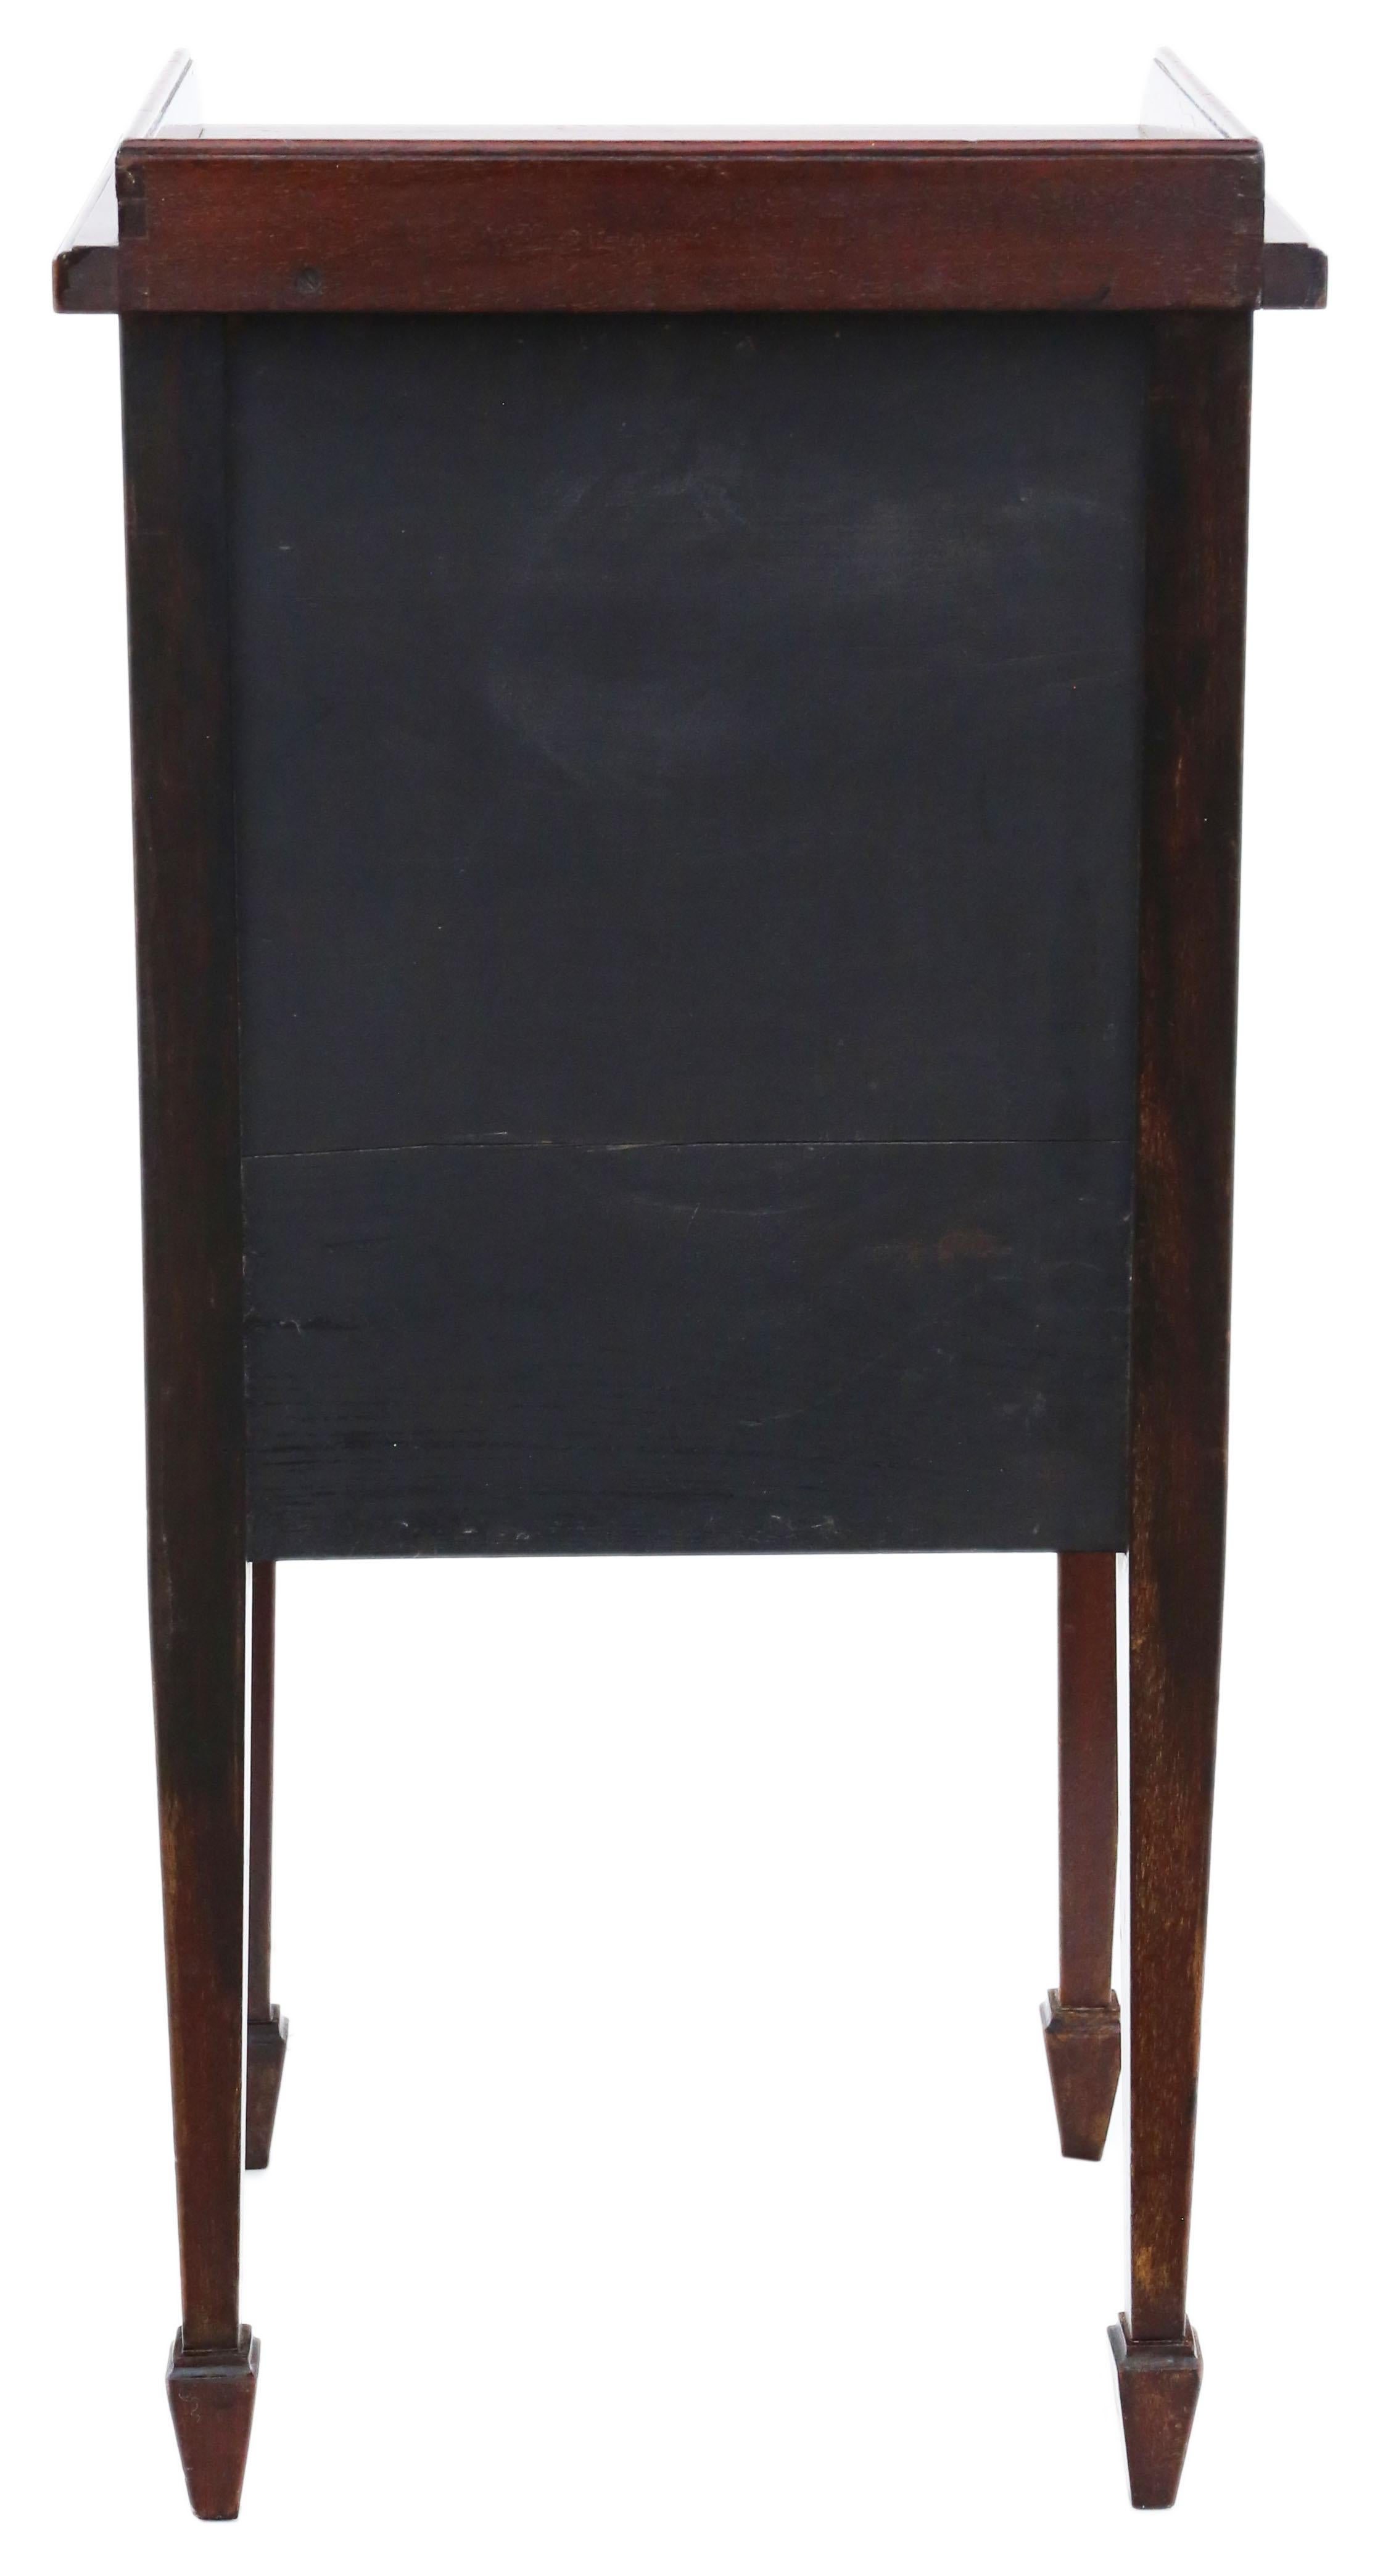 Antique Fine Quality Tray Top Inlaid Mahogany Bedside Table Cupboard, circa 1905 For Sale 1